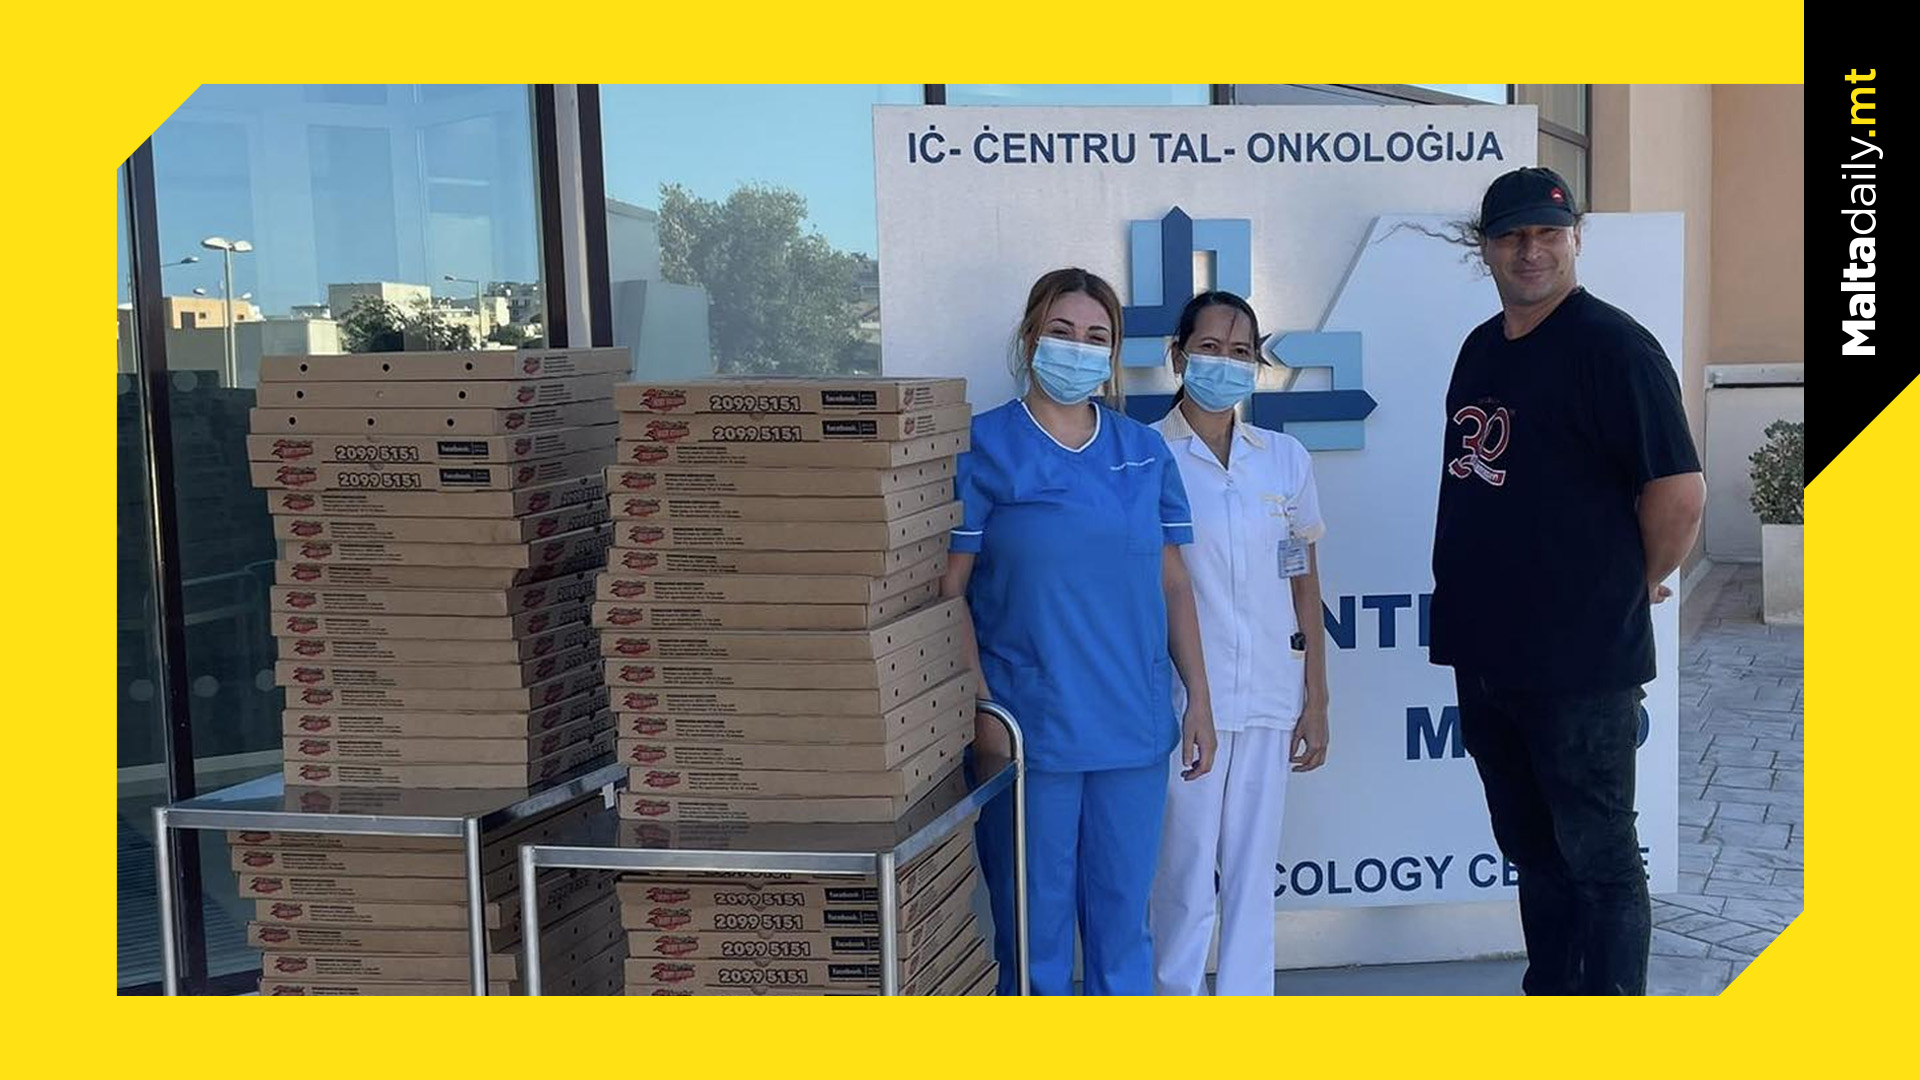 Pizza Hut Donate Around 60 Pizzas to Mater Dei's Oncology Centre